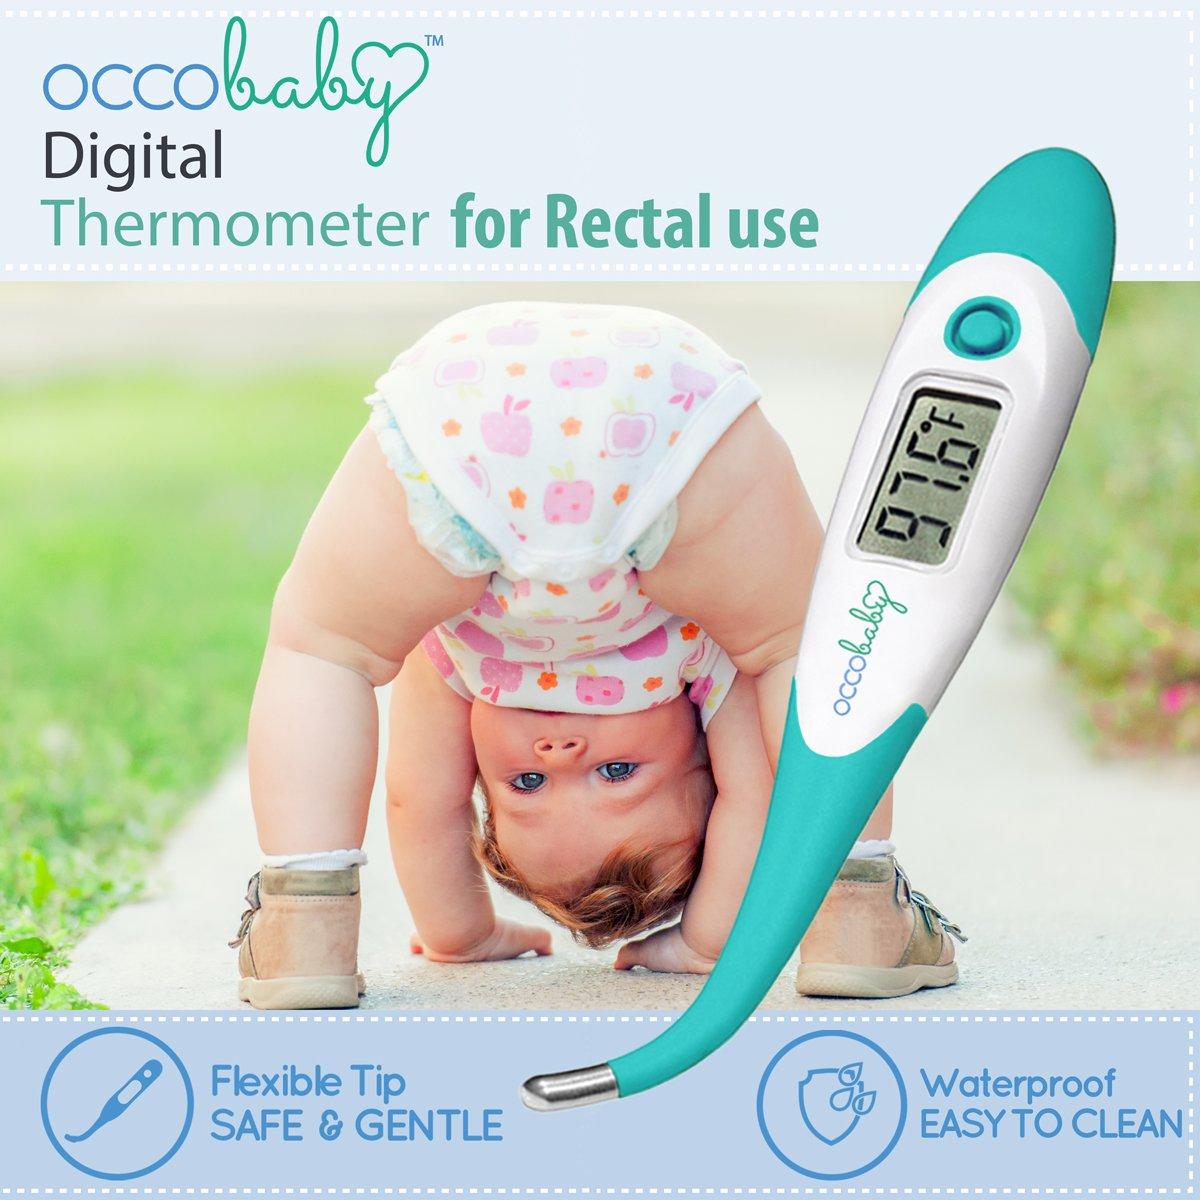 OCCObaby Clinical Digital Baby Thermometer - LCD, Flexible Tip, 10 Second  Quick Accurate Fever Read Rectal Oral & Underarm Thermometer for Kids -  Waterproof Baby Thermometer for Infants & Toddlers OCCOflex